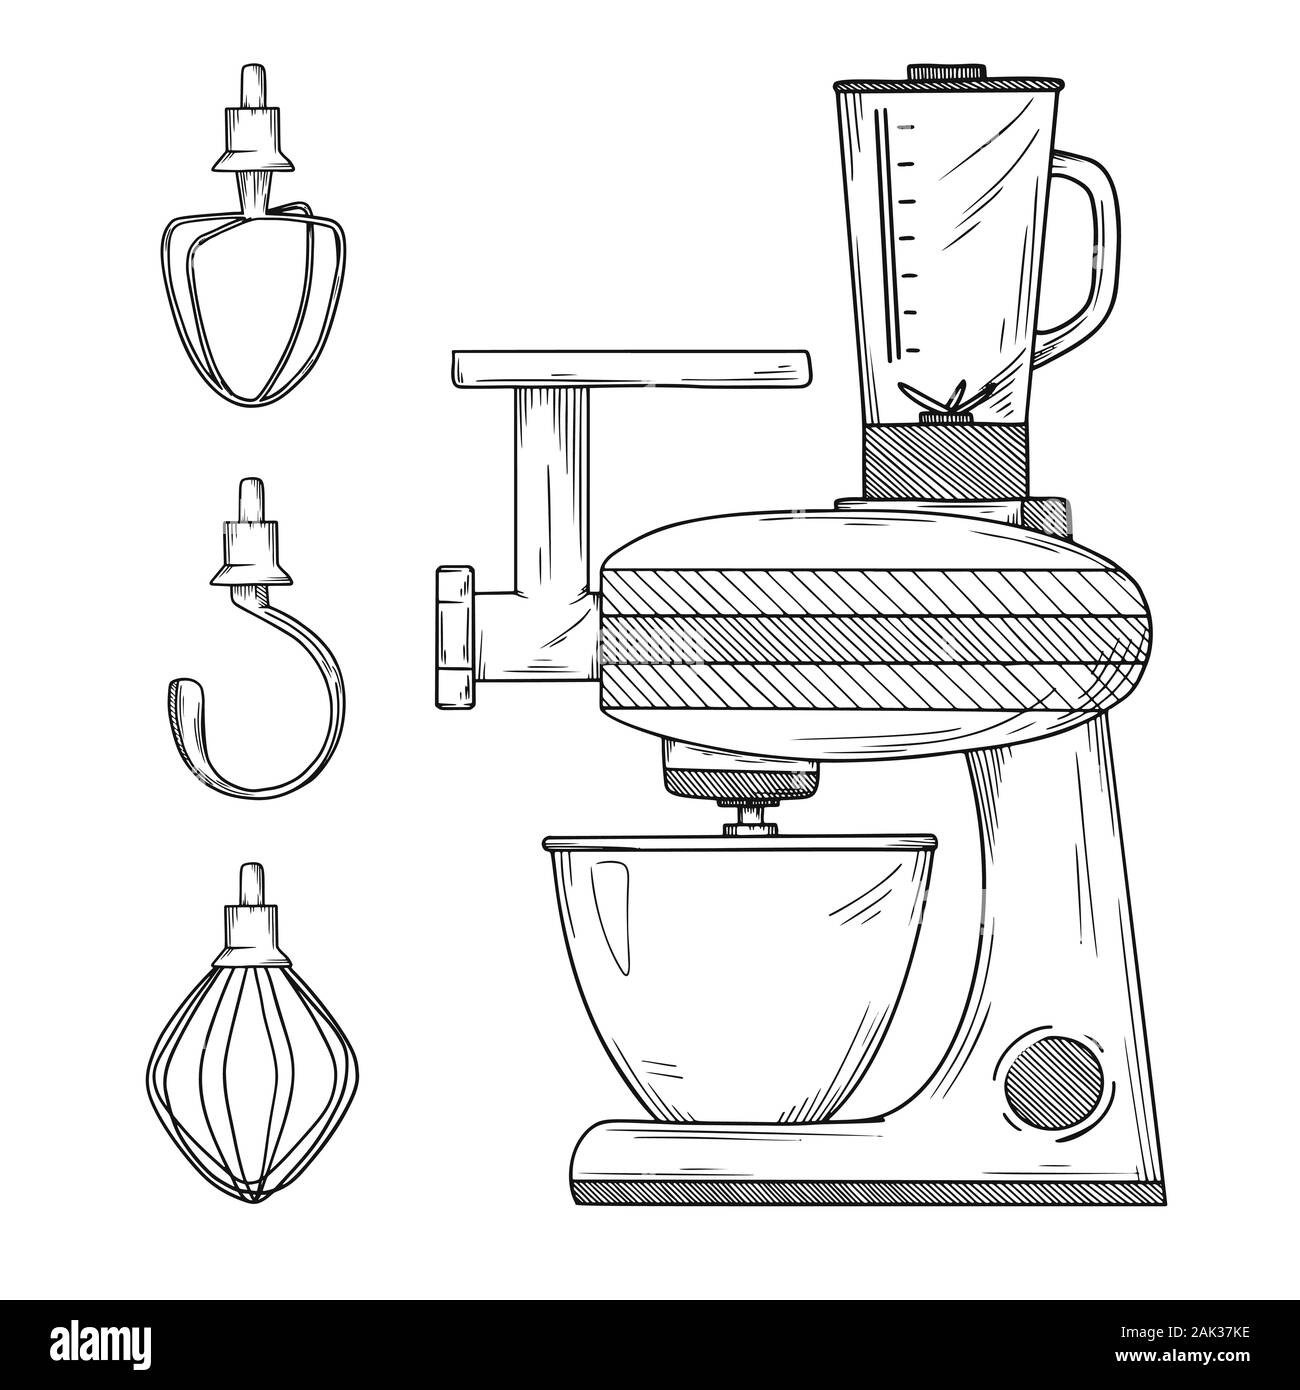 Buy Baking Stand Mixer Line Drawing CUSTOM COLOR or Minimalist Black and  White 5x7 or 8x10 Online in India - Etsy